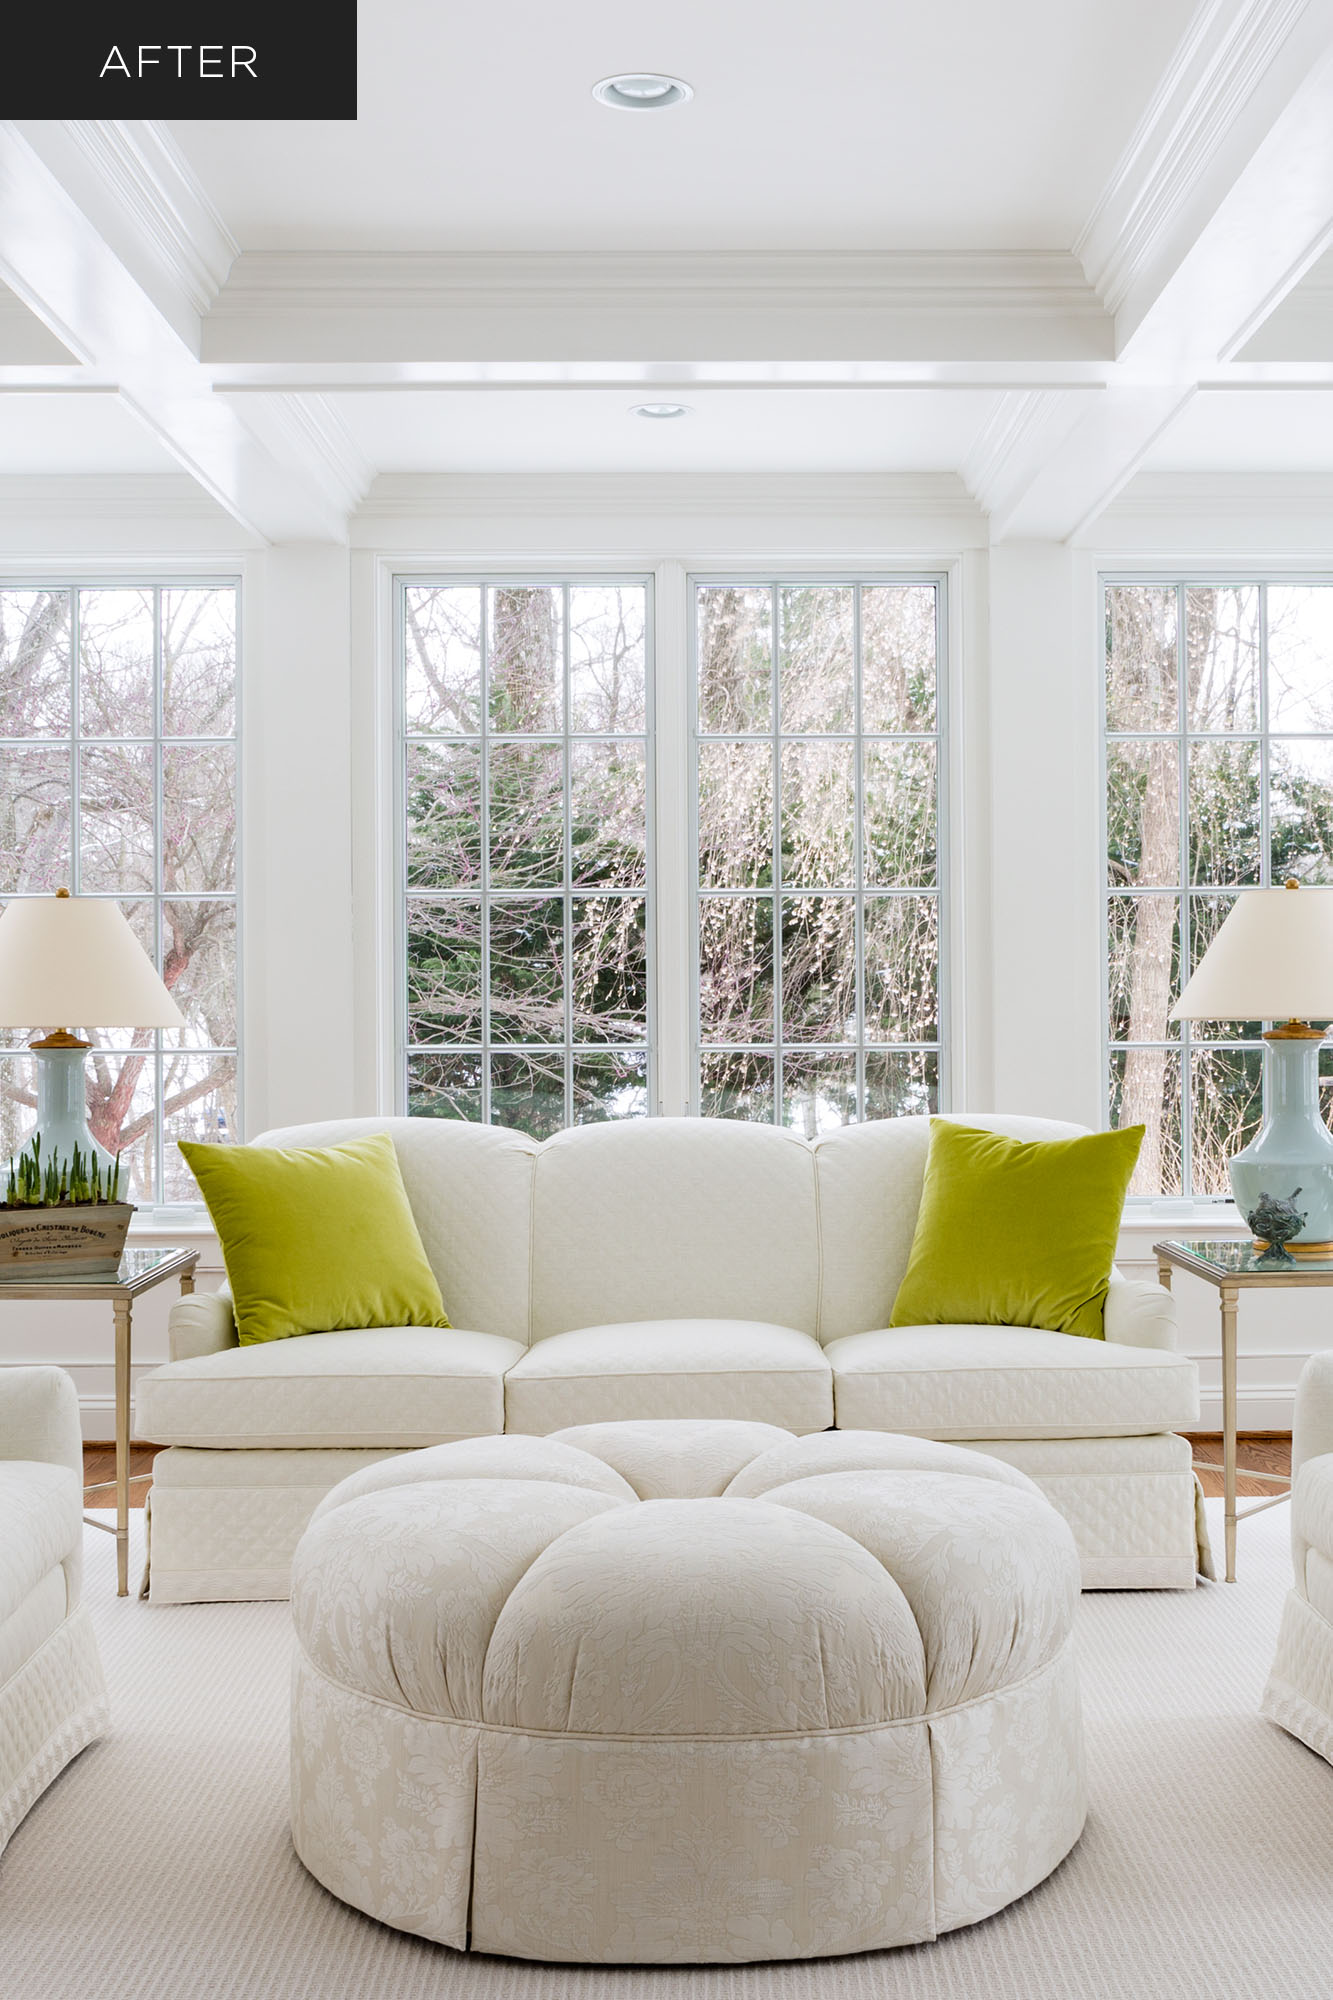 Home sunroom renovation with soffit ceiling, white furniture, white windowpanes and view of snowy landscape